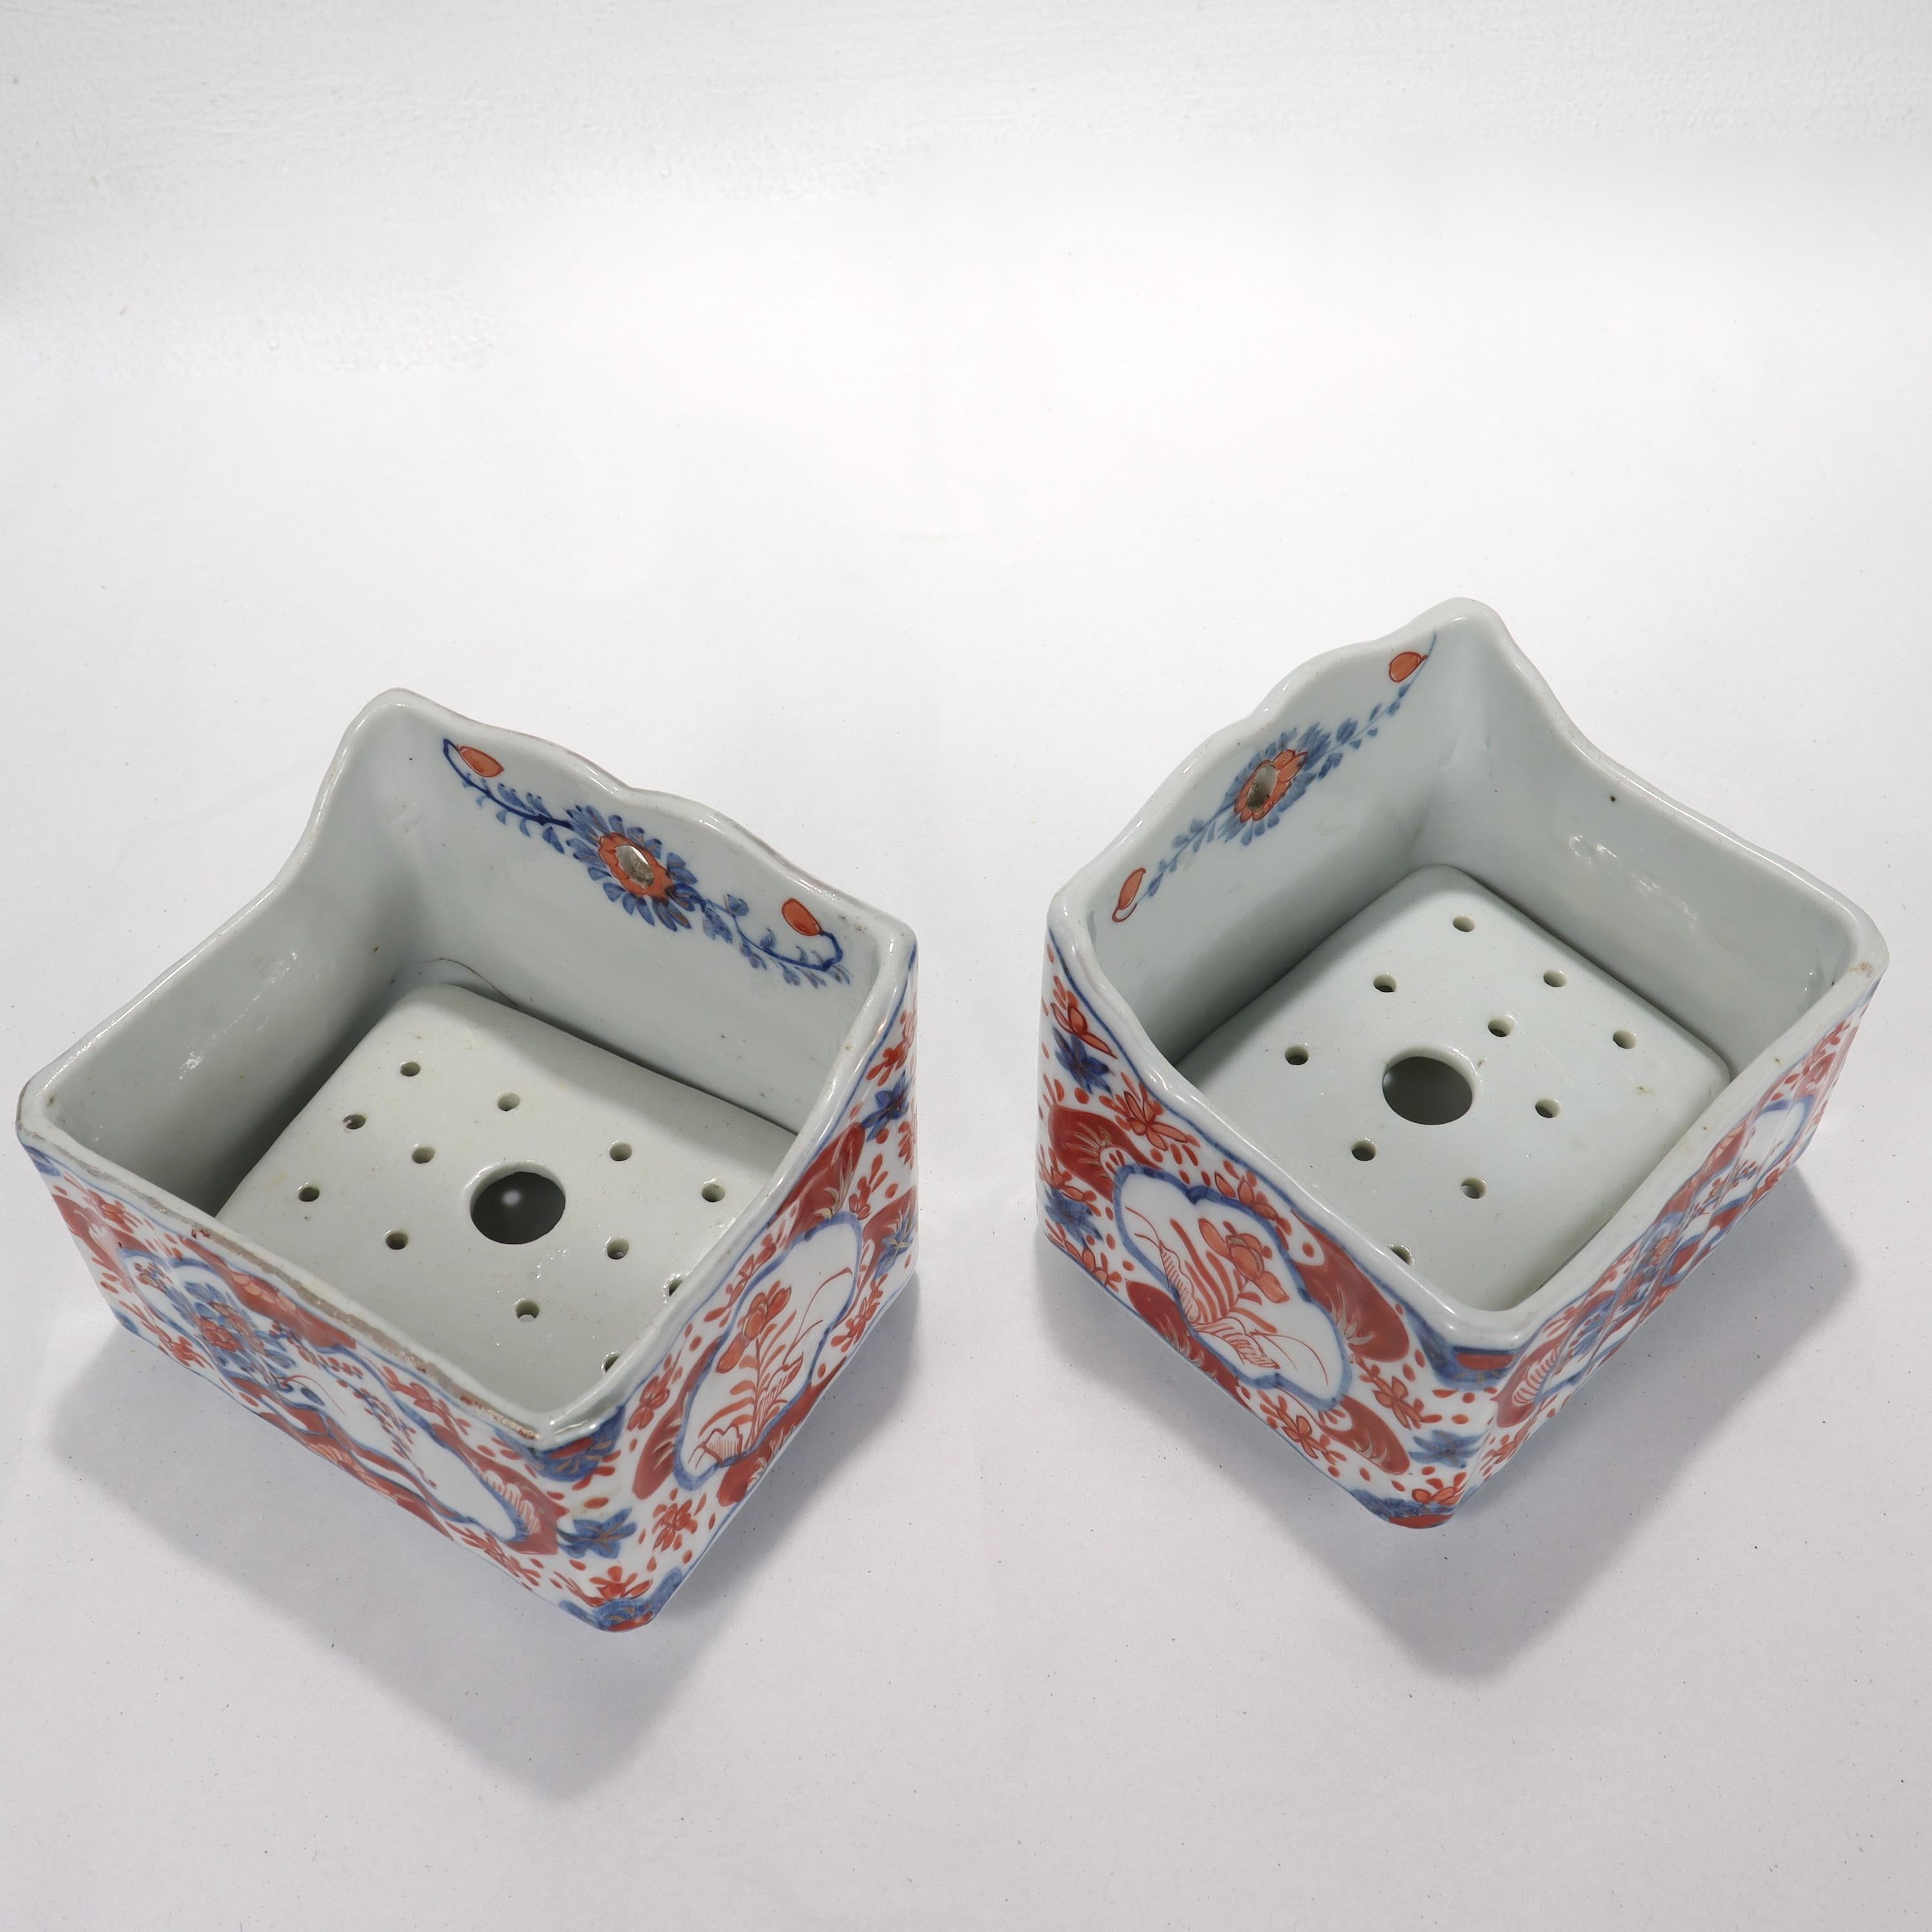 Pair of Old or Antique Japanese Imari Porcelain Soap Dishes For Sale 4